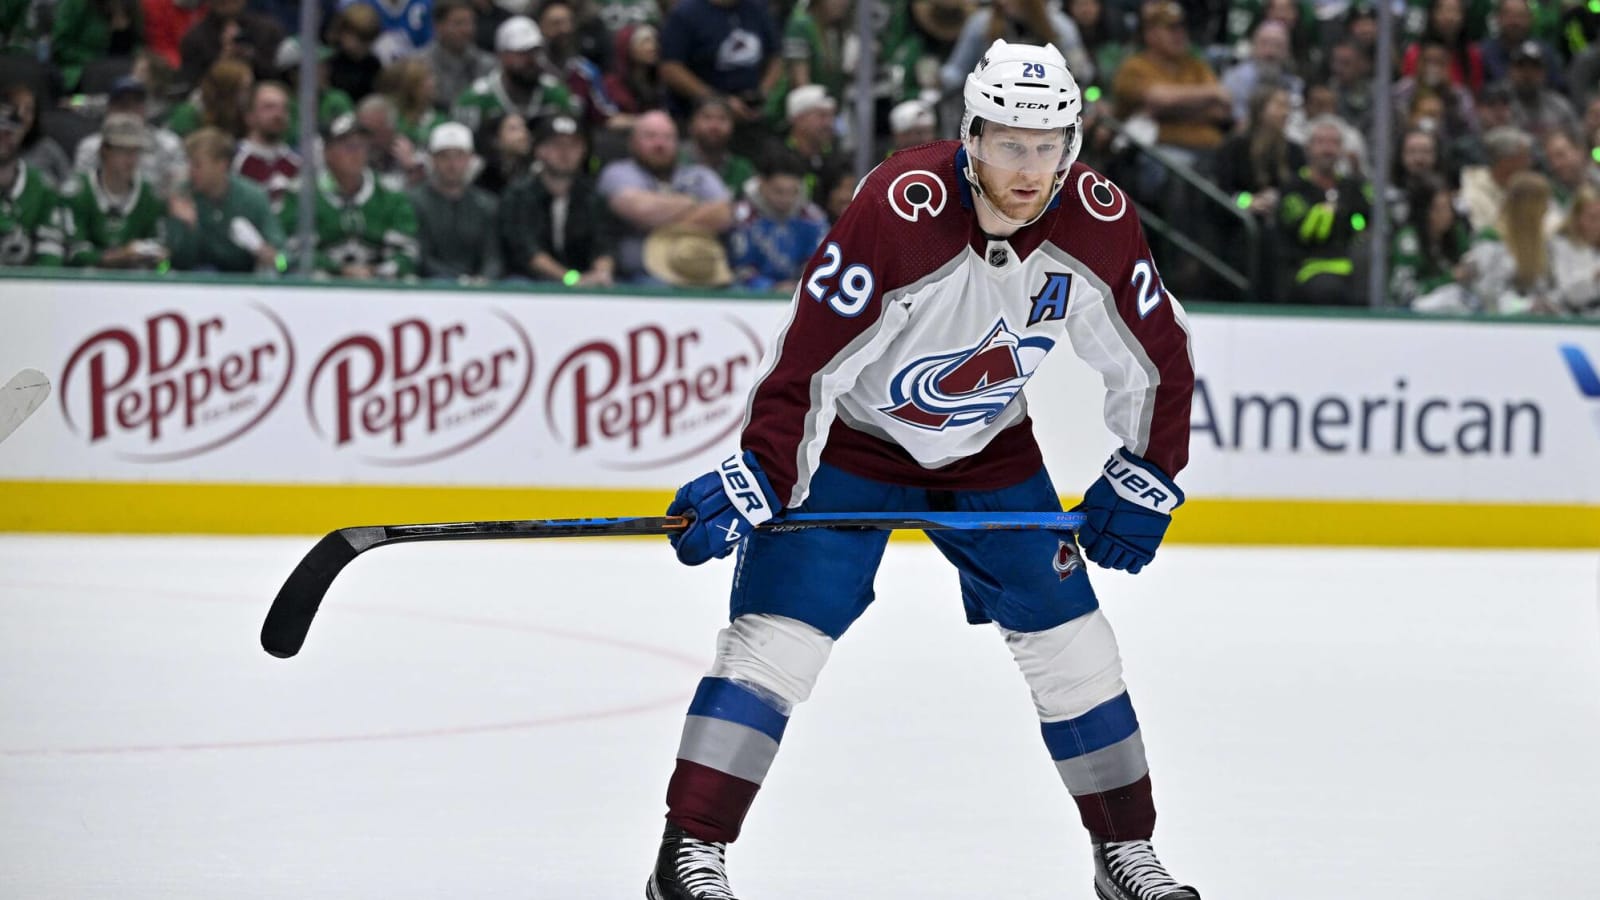 Rapid Reaction: Top Forwards Drop The Ball For Avalanche